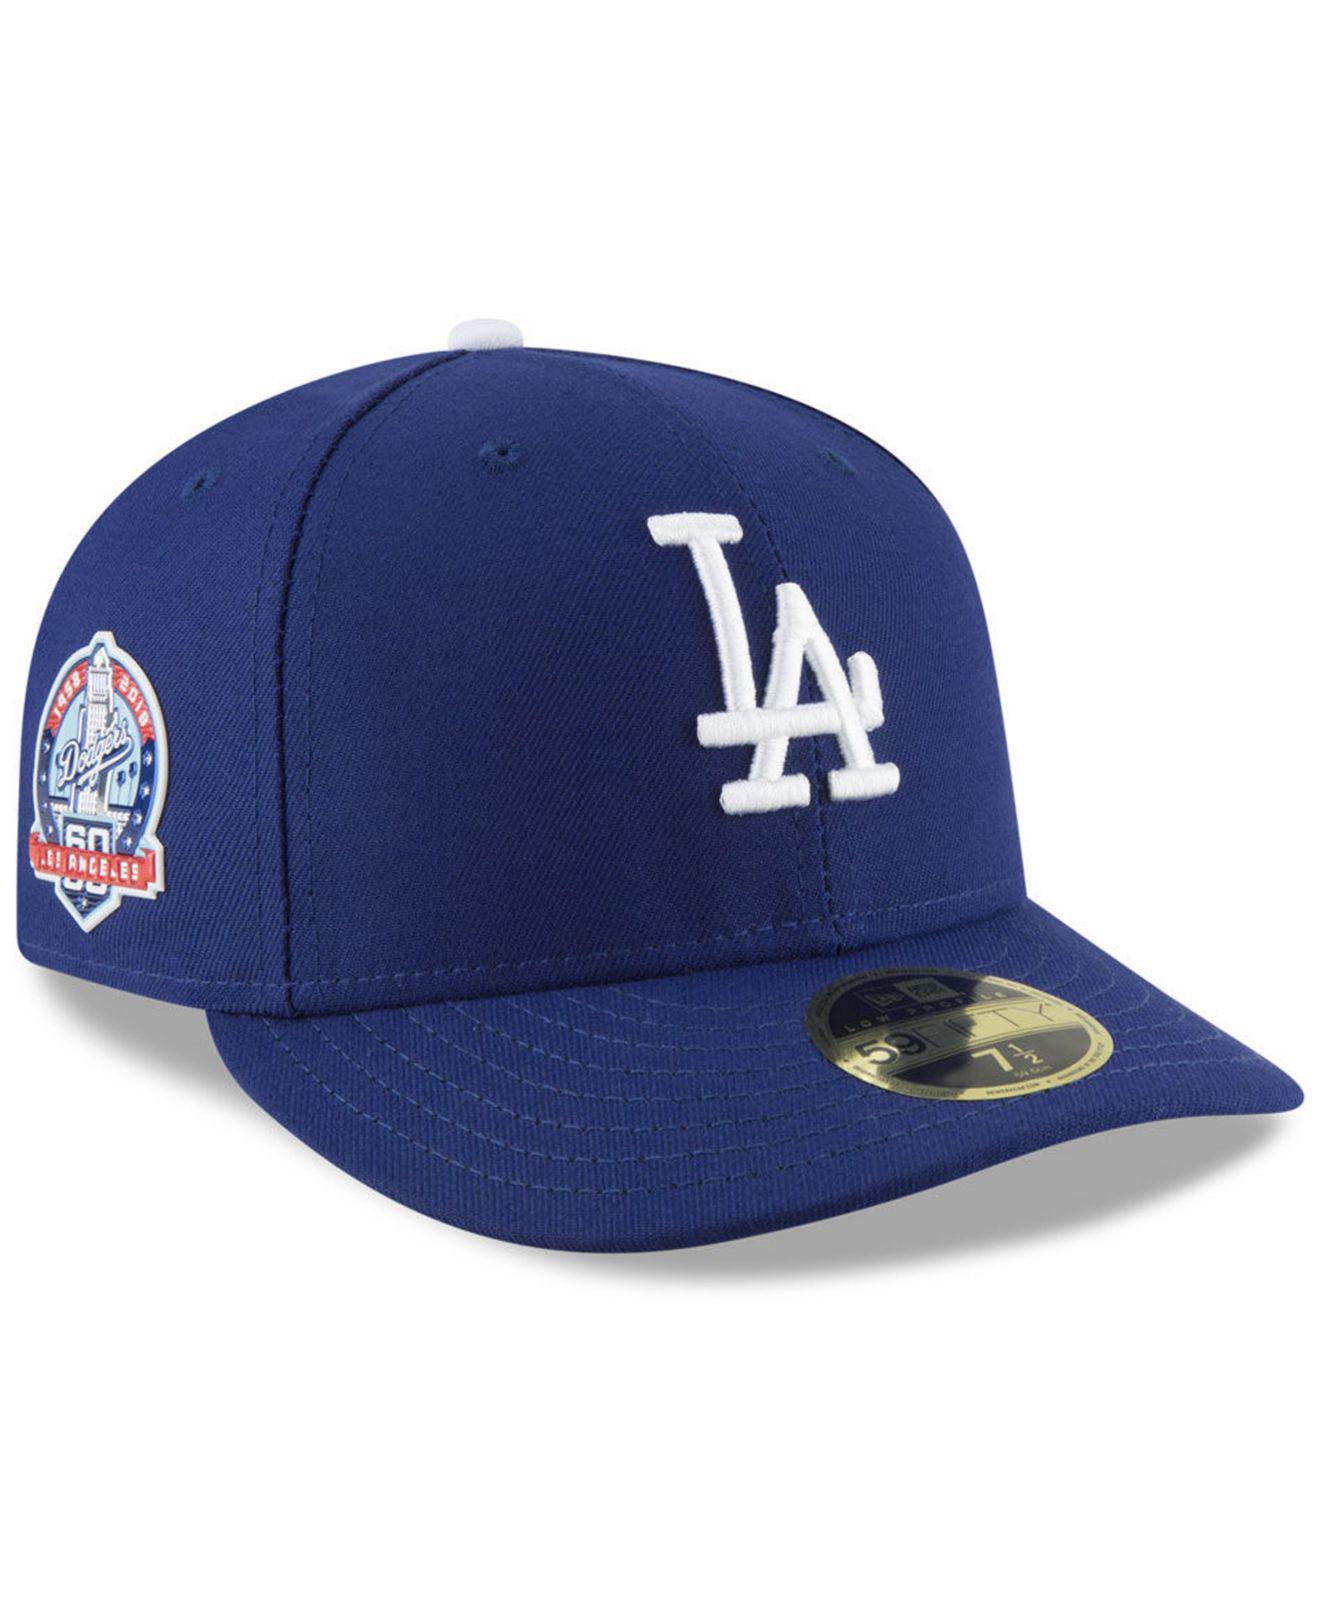 dodgers 60th anniversary patch